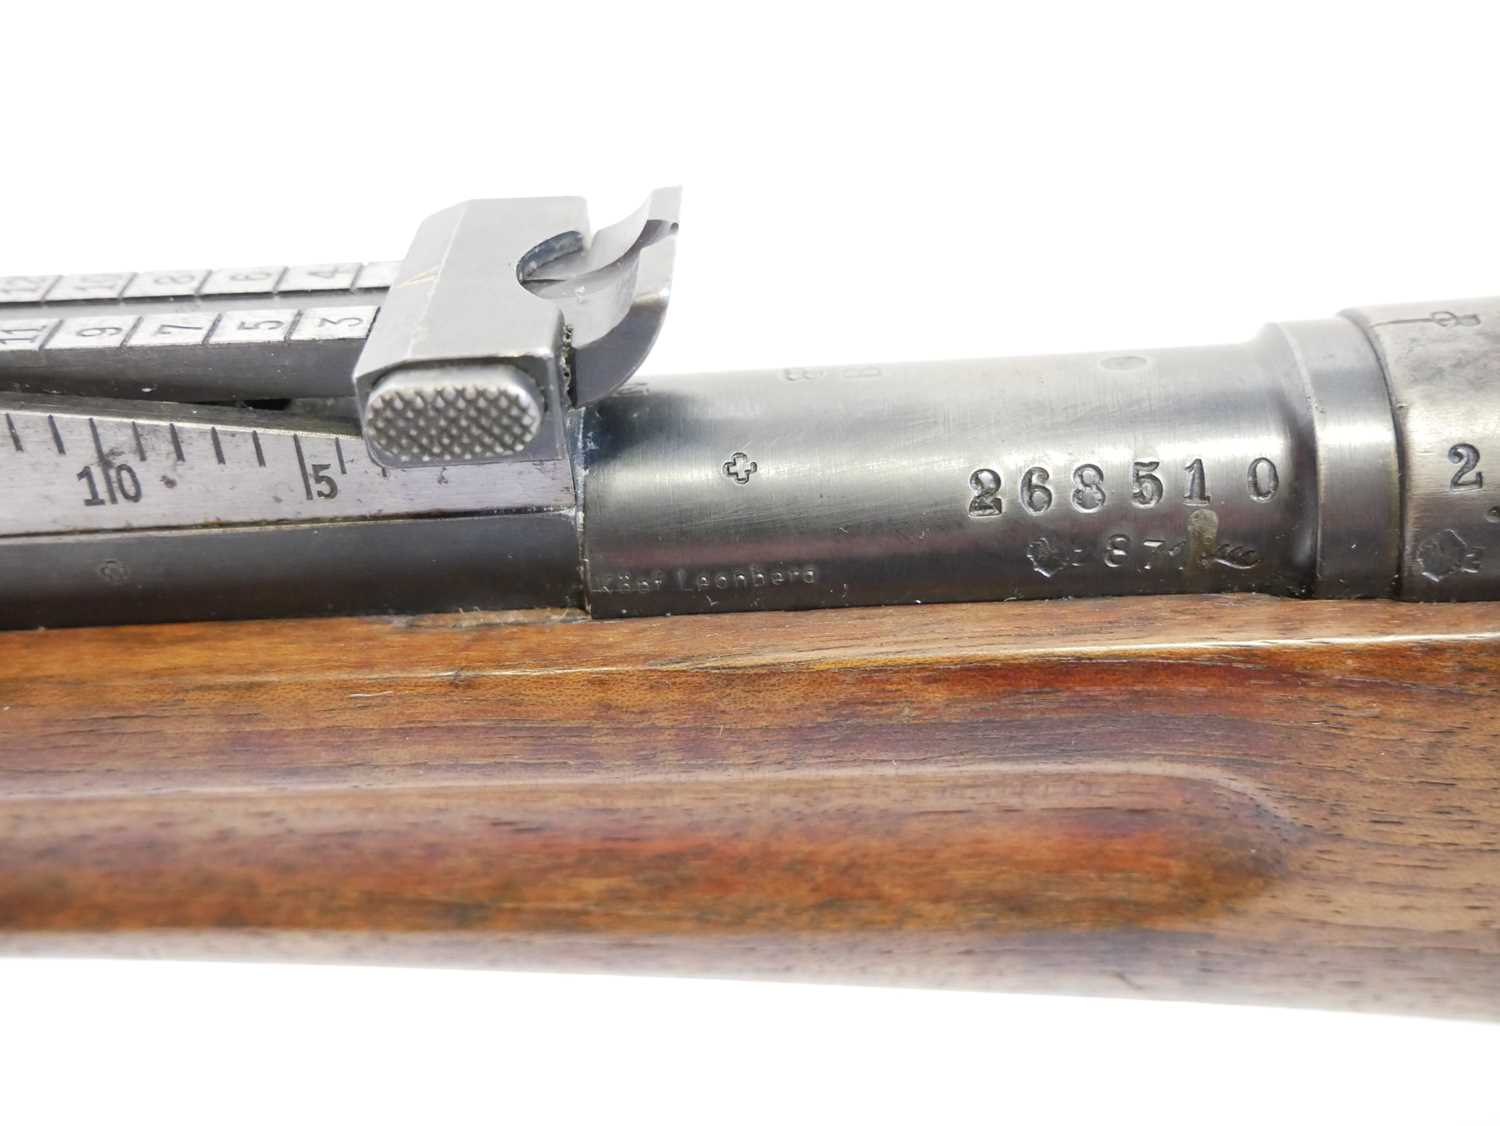 Schmidt Rubin 1896 7.5mm straight pull rifle, matching serial numbers 268510 to barrel, receiver, - Image 12 of 15